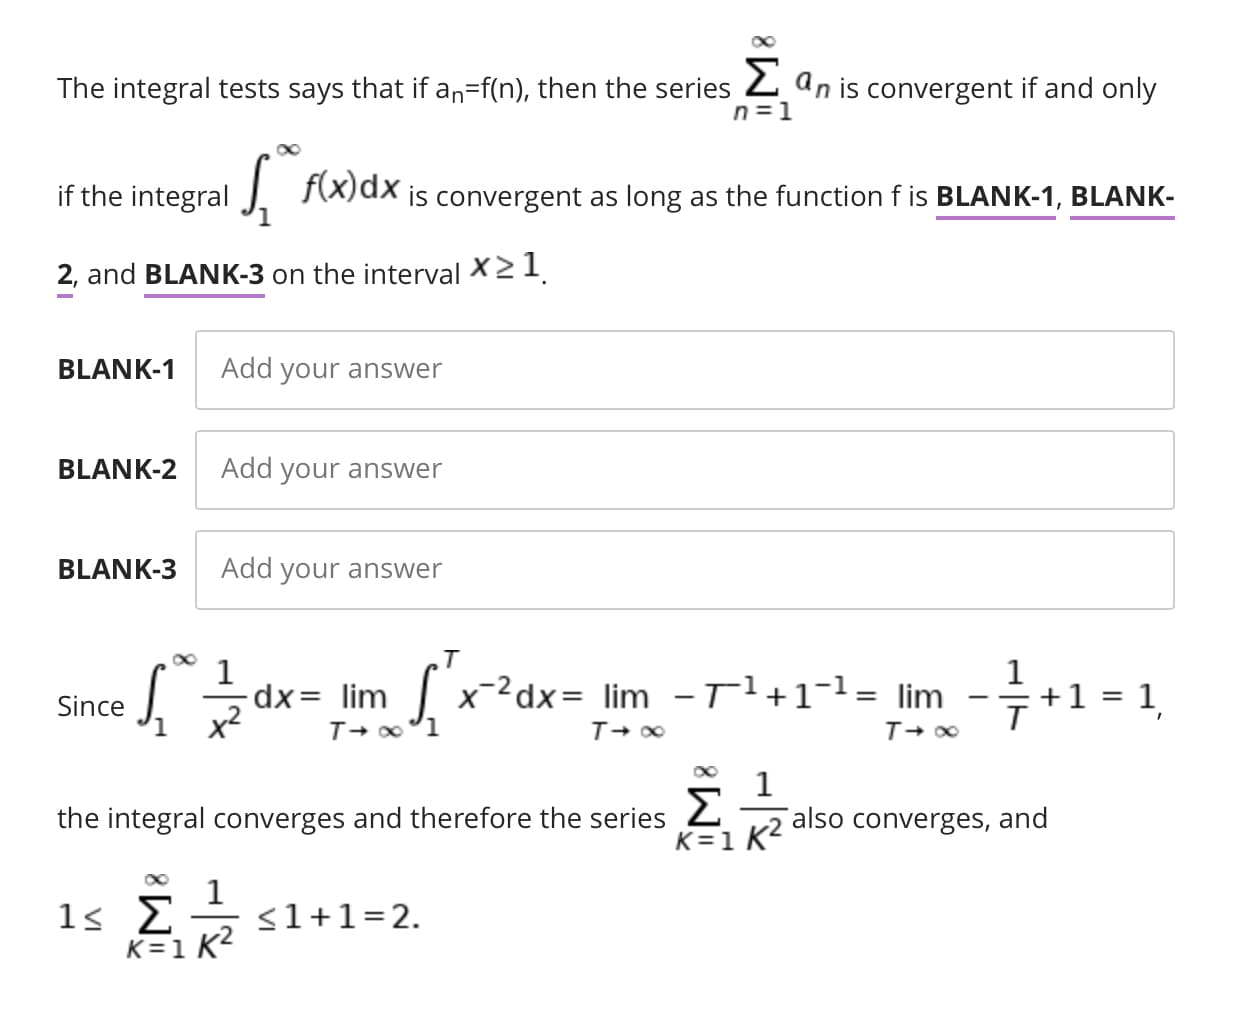 The integral tests says that if an=f(n), then the series 2 an is convergent if and only
n =1
if the integral
J F(x)dx
is convergent as long as the function f is BLANK-1, BLANK-
2, and BLANK-3 on the interval X21.
BLANK-1
Add your answer
BLANK-2
Add your answer
BLANK-3
Add your answer
.T
dx= lim
x-2dx= lim -Tl+1¬1= lim
+1 = 1
Since
the integral converges and therefore the series 2
K=1 K?
also converges, and
<1+1=2.
K=1 K2
